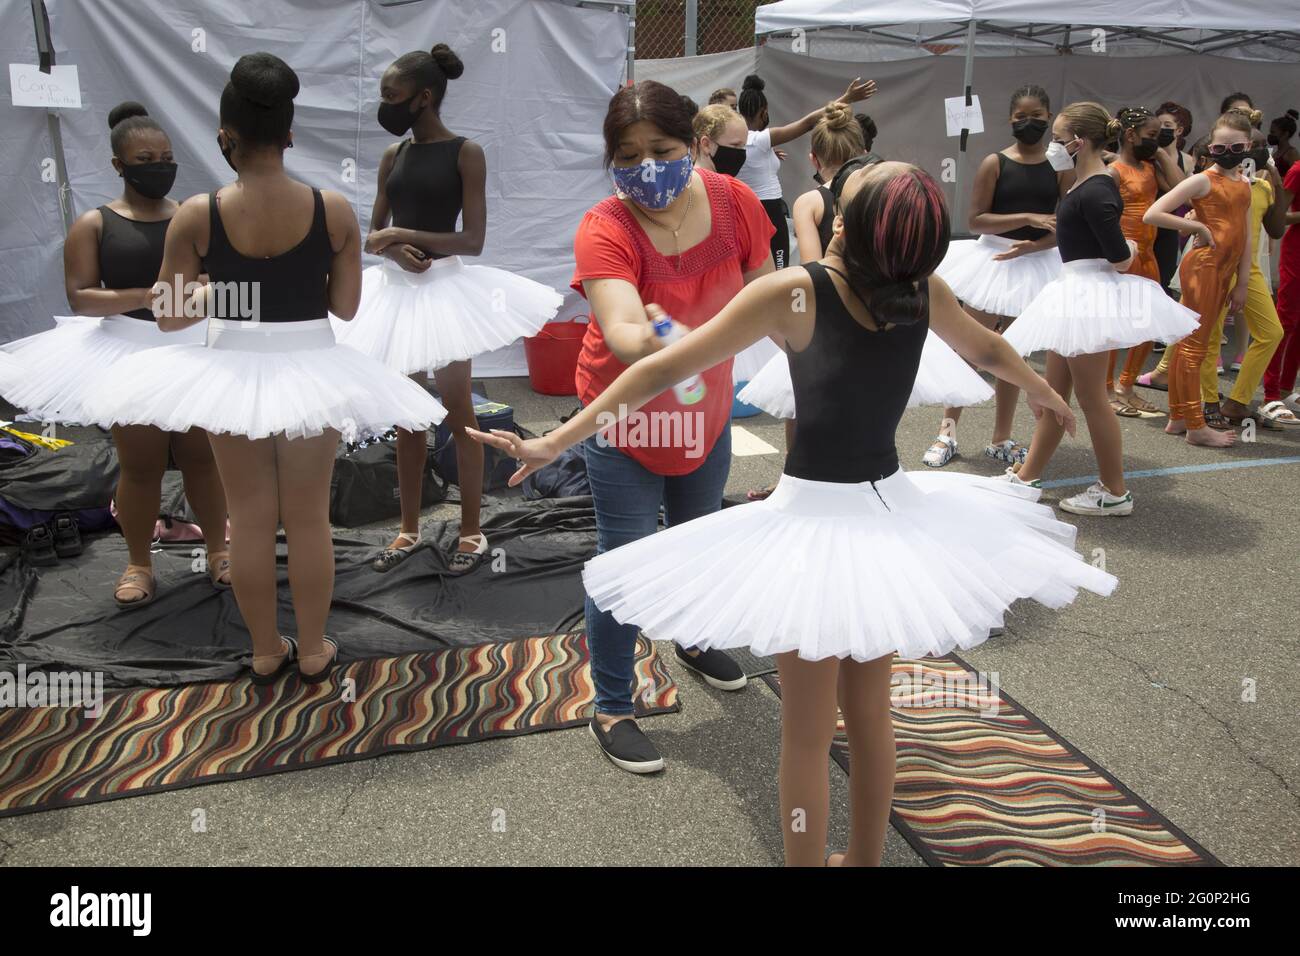 Cynthia KIng Dance Studio for kids in Brooklyn, New York holds its first performance outdoors, with masks and social distancing in the spring 2021 since the pandemic and city shutdown began over a year earlier. Preparing to perform. Stock Photo